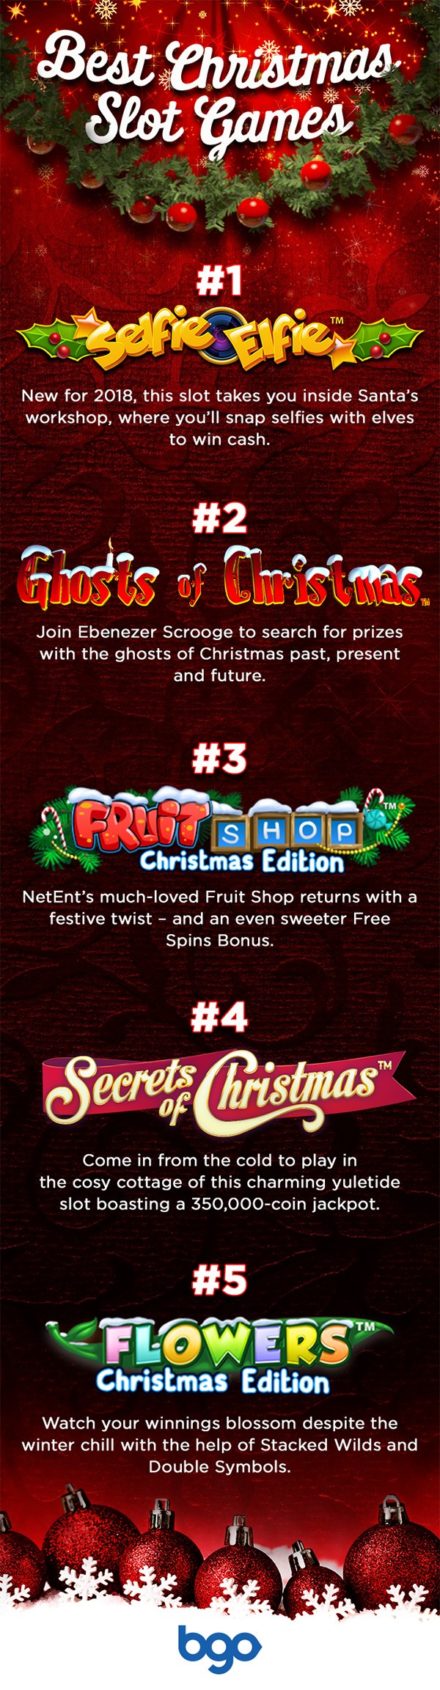 Avoid festive burnout: relax playing the best slot games this Christmas